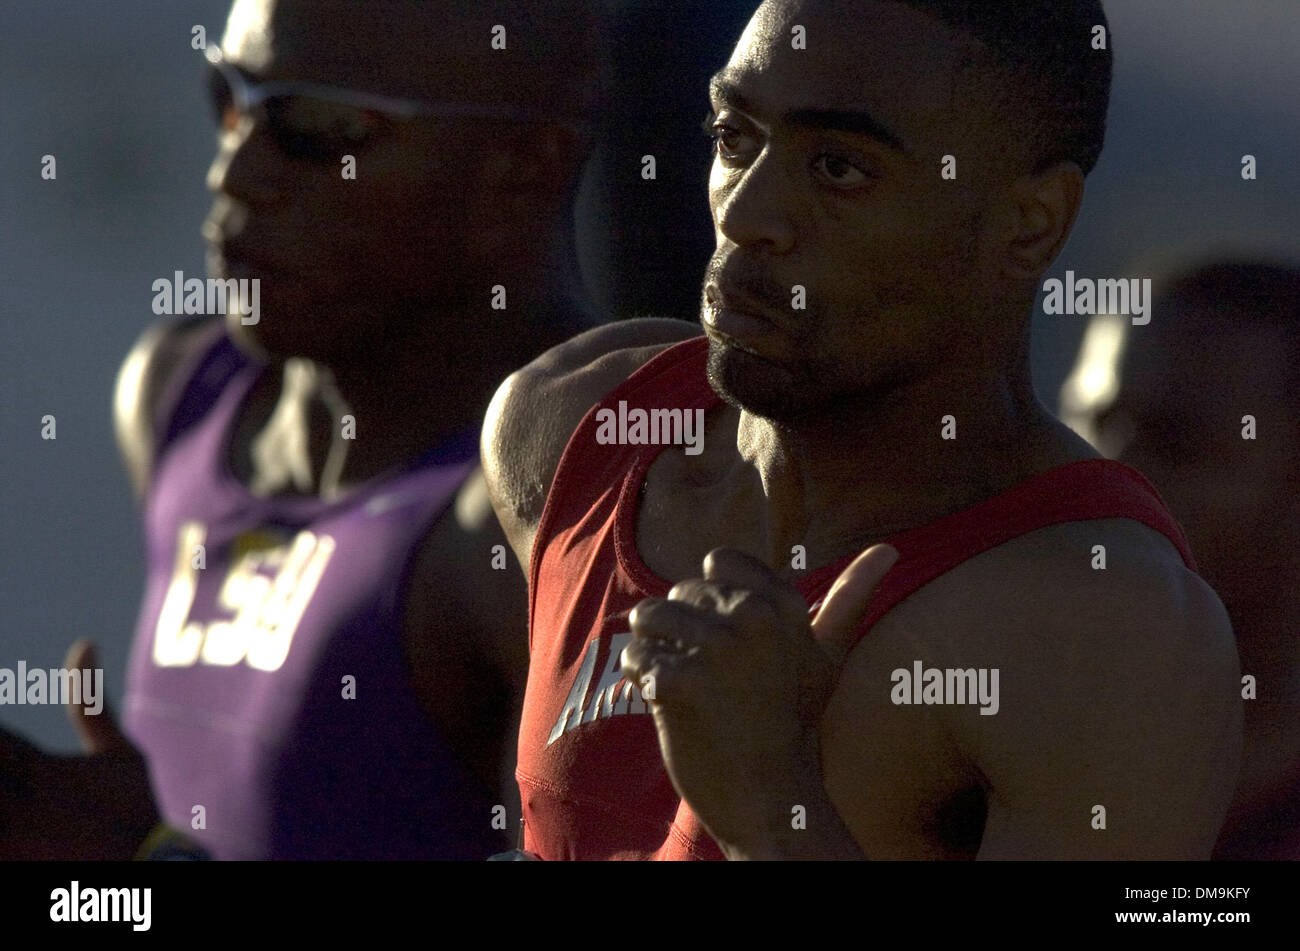 Jun 09, 2005; Sacramento, CA, USA; Arkansas' Tyson Gay runs a very fast 19.93 in the men's 200m semi on day two of the 2005 Division I Men's and Women's Outdoor Track and Field Championships at the Alex G. Spanos Sports Complex. Mandatory Credit: Photo by Carl Costas/Sacramento Bee/ZUMA Press. (©) Copyright 2005 by Carl Costas/Sacramento Bee Stock Photo